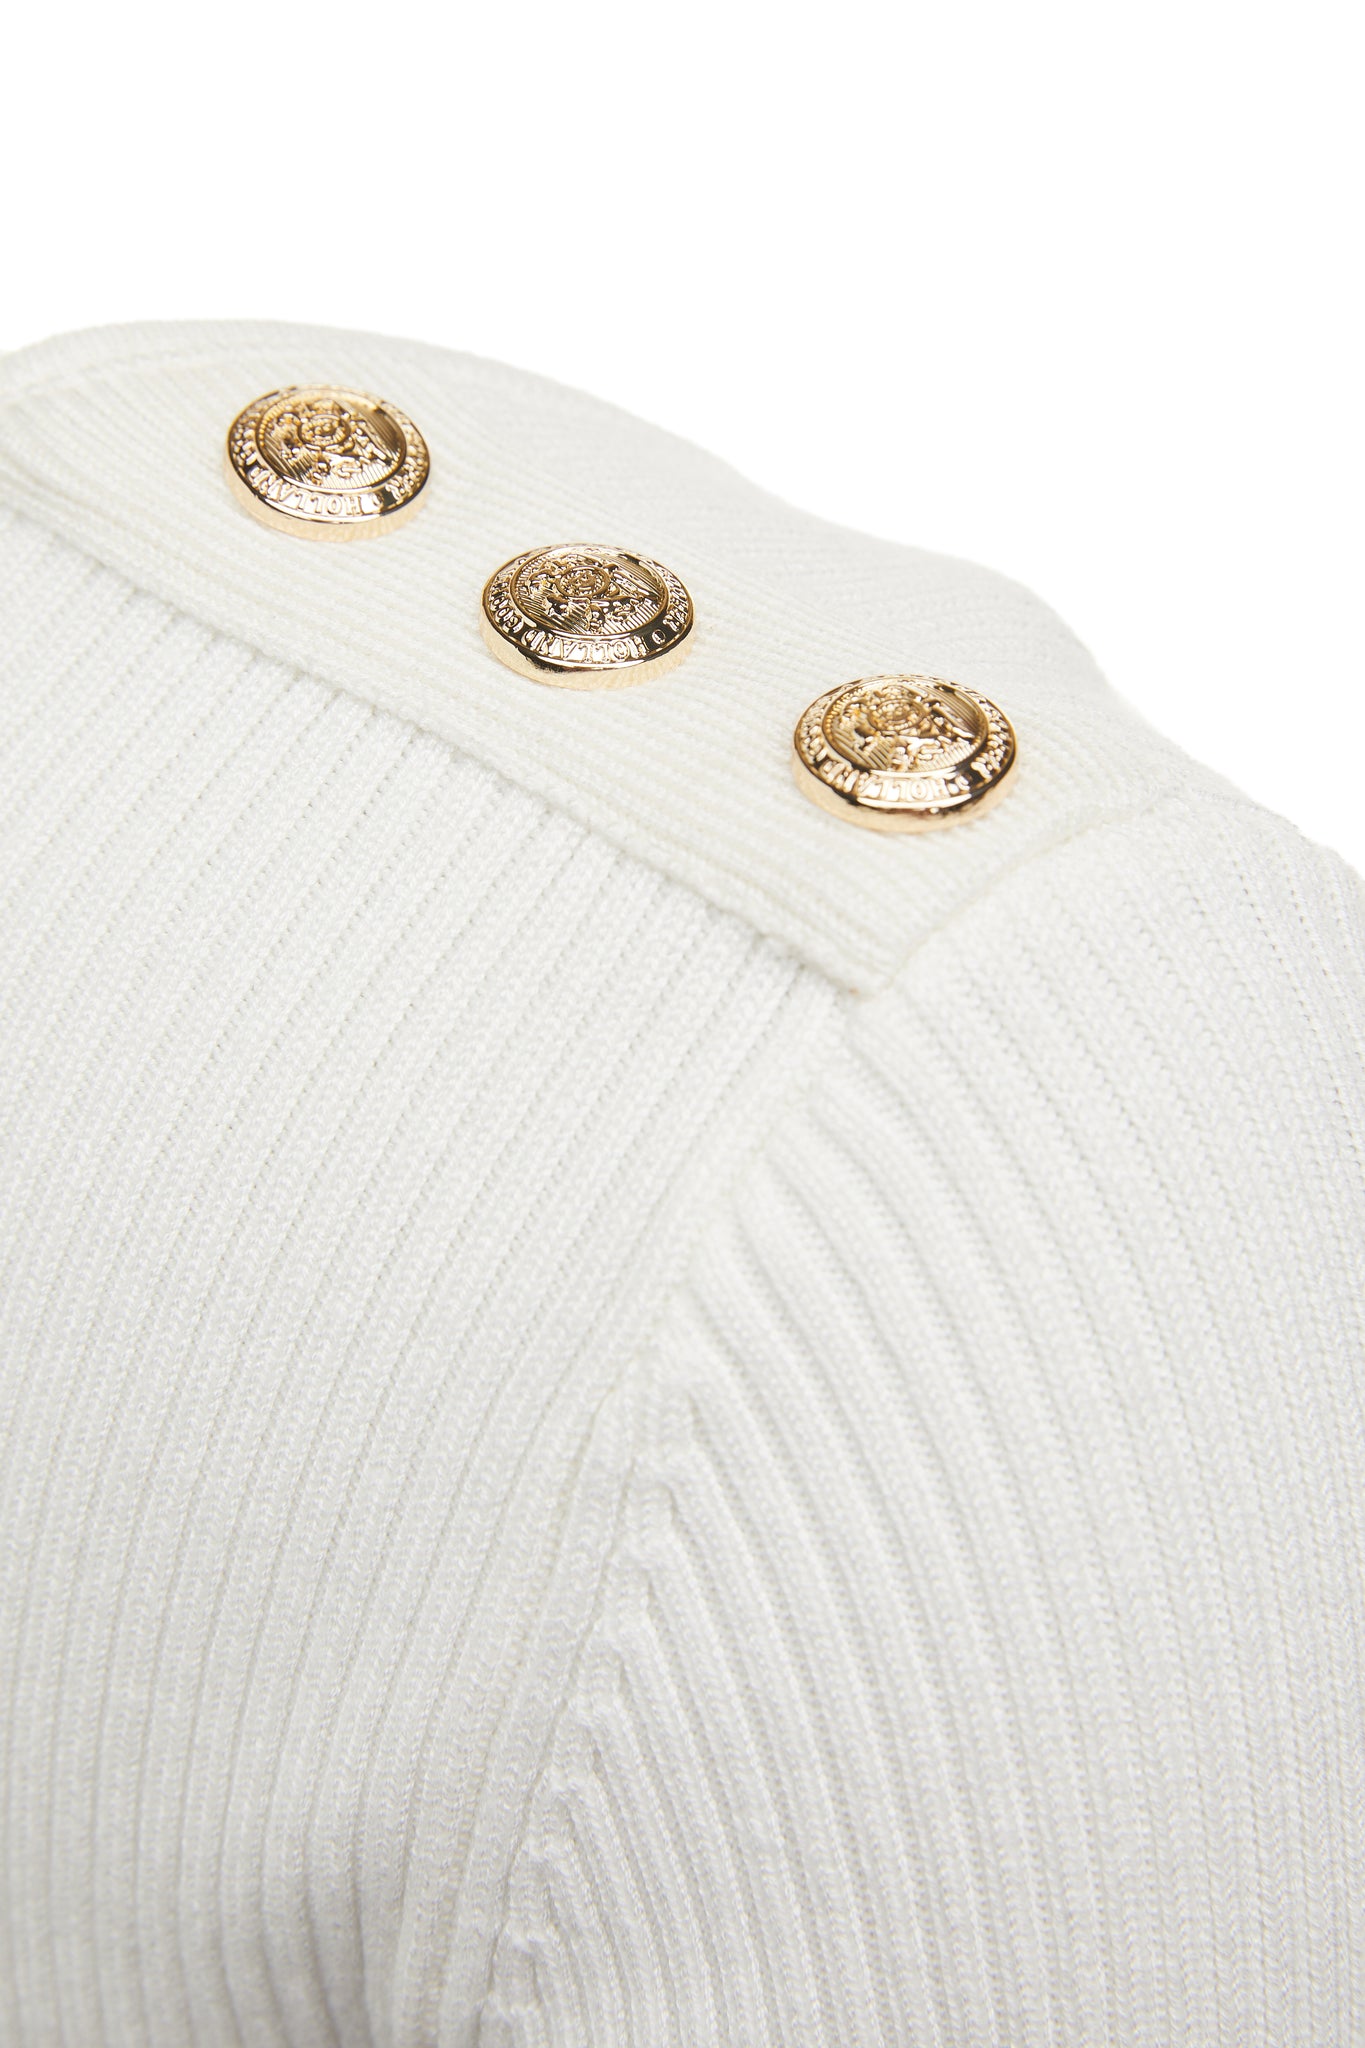 gold button detail accross shoulders of a form fitting finely ribbed long sleeved knitted top in cream with a sweetheart neckline 